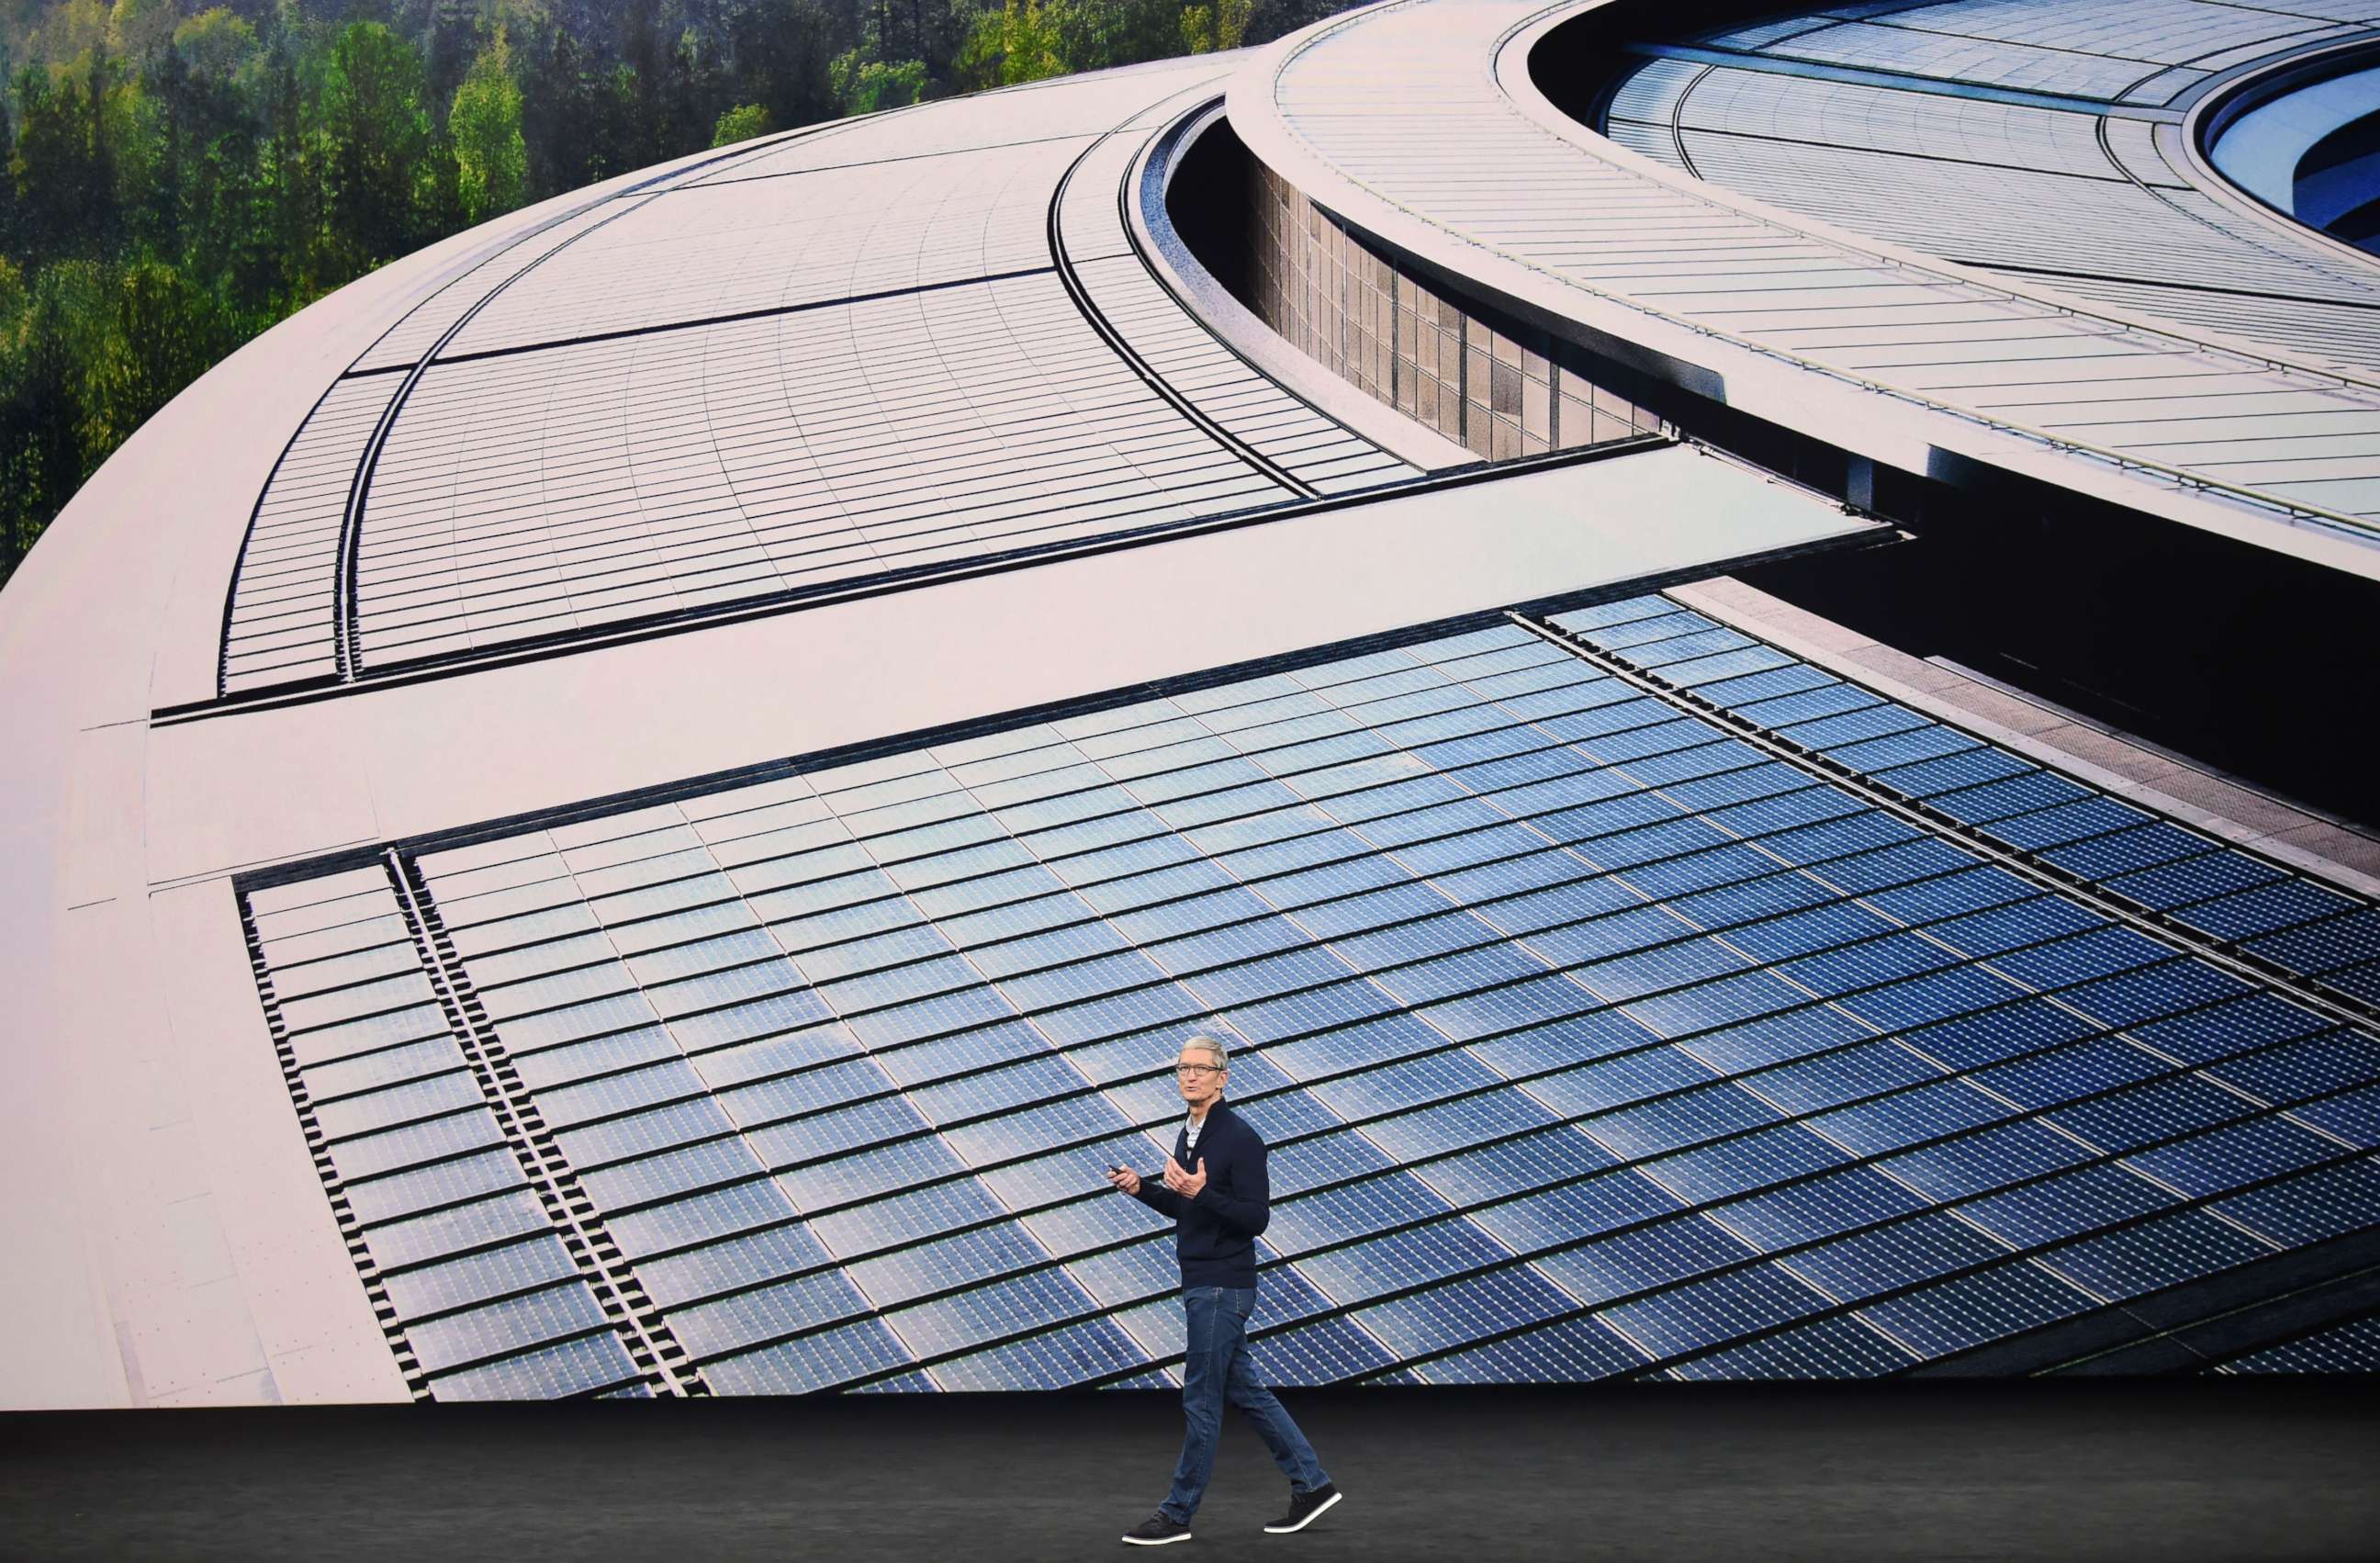 PHOTO: Apple CEO Tim Cook speaks about renewable energy during a media event at Apple's new headquarters where Apple is expected to announce a new iPhone and other products in Cupertino, Calif., on Sept. 12, 2017. 